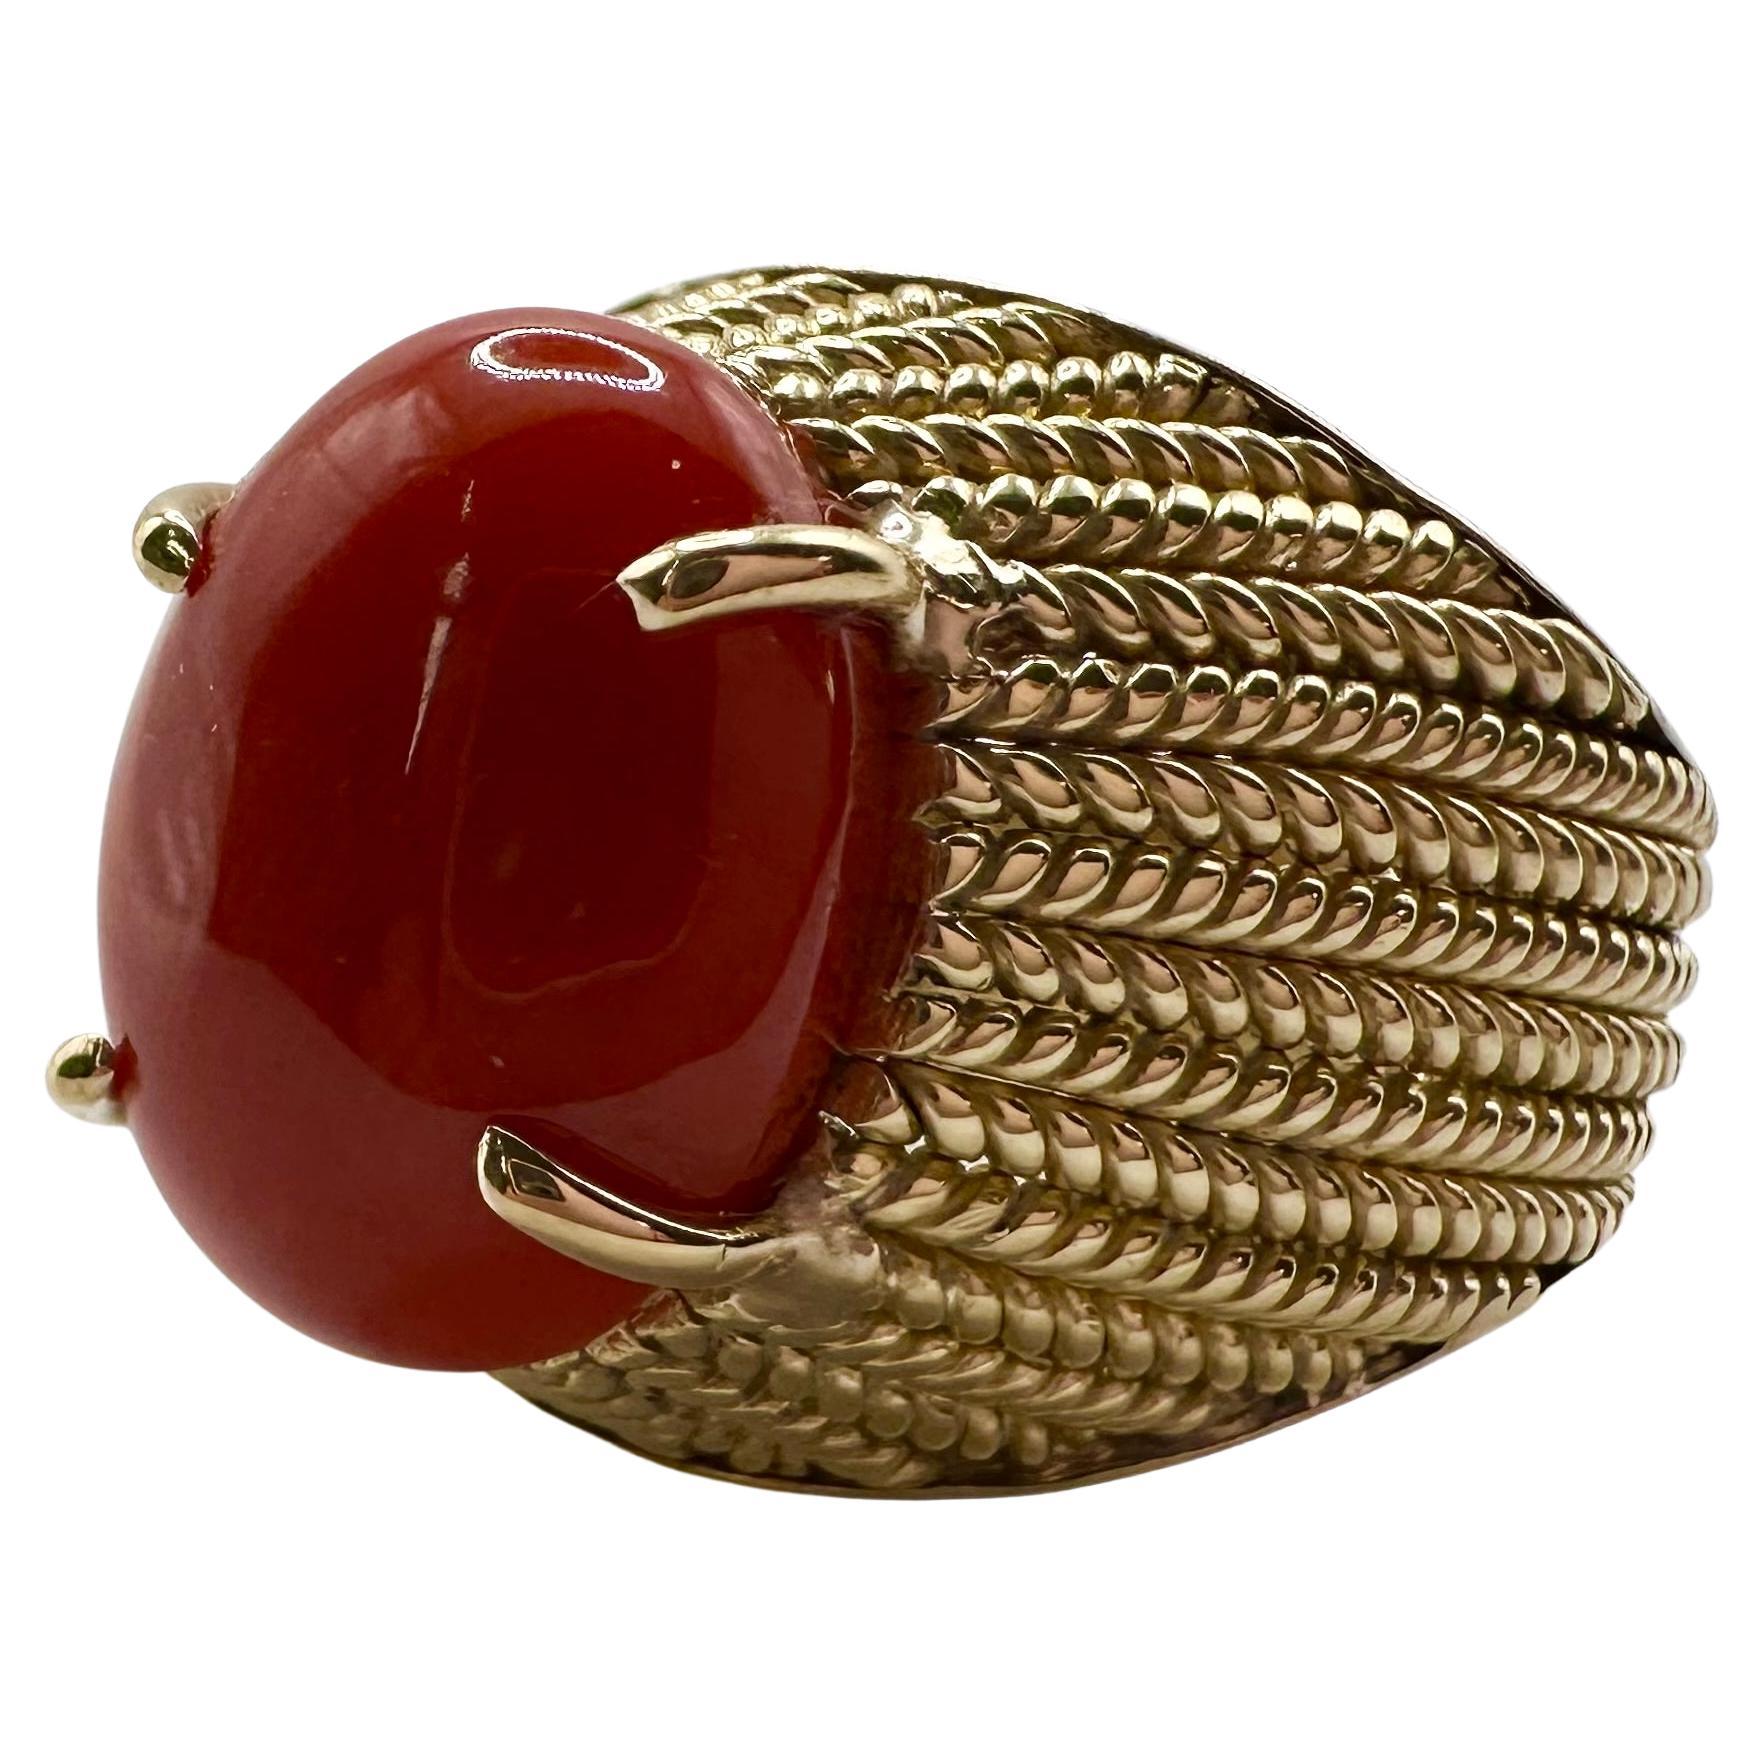 Jewelryonclick Real 5 Carat Red Coral Gold Plated Ring for Men Prong Style  in Size 5,6,7,8,9,10,11,12,13|Amazon.com